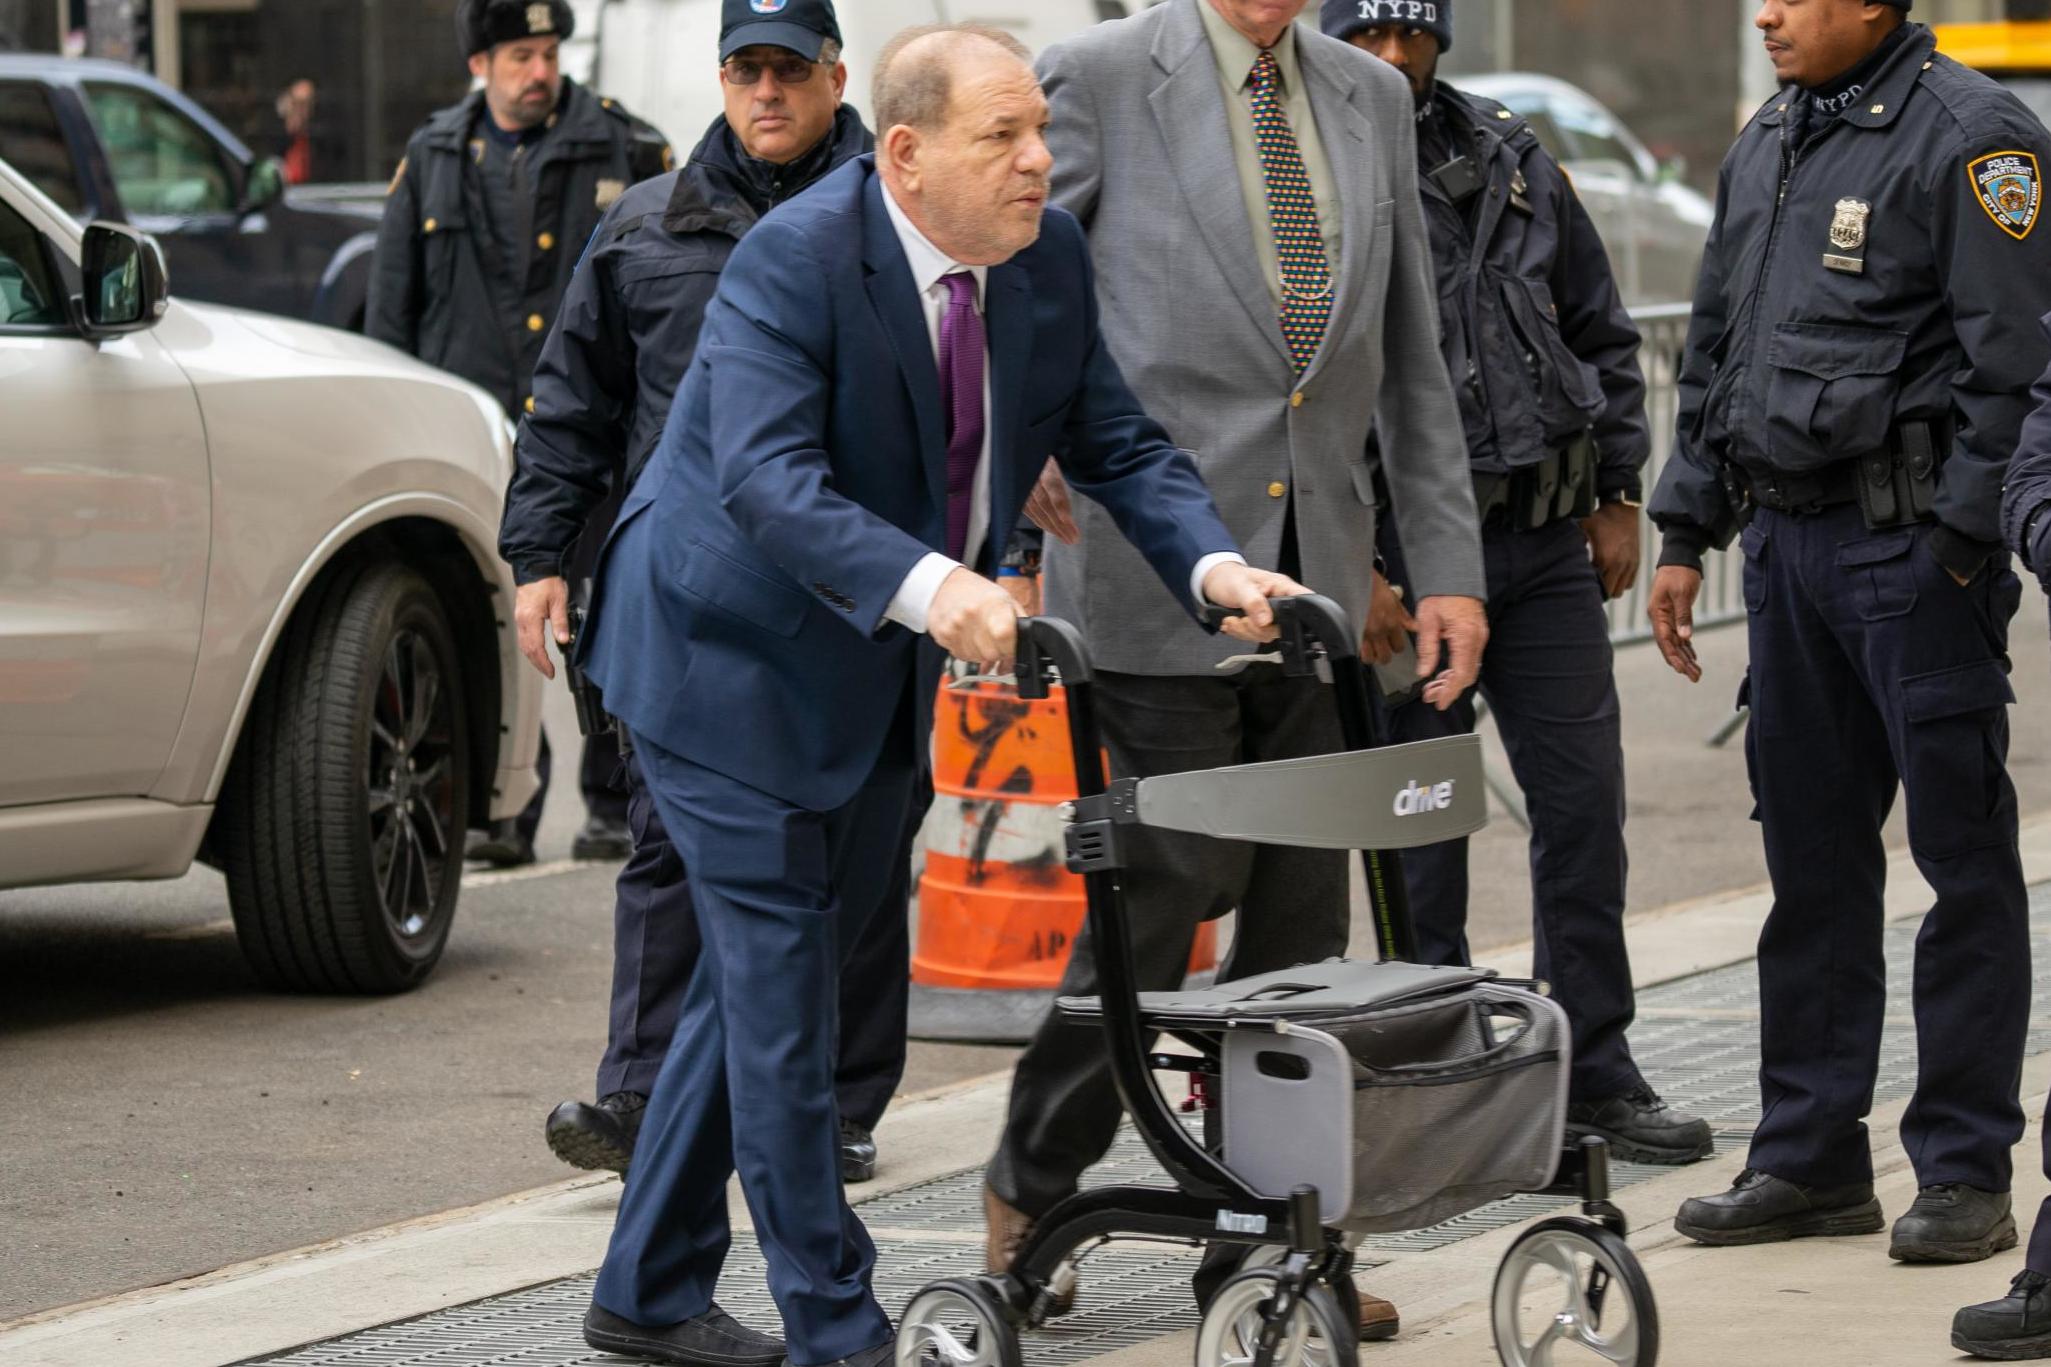 Weinstein has used his now-infamous walker for some court appearances, though not all of them